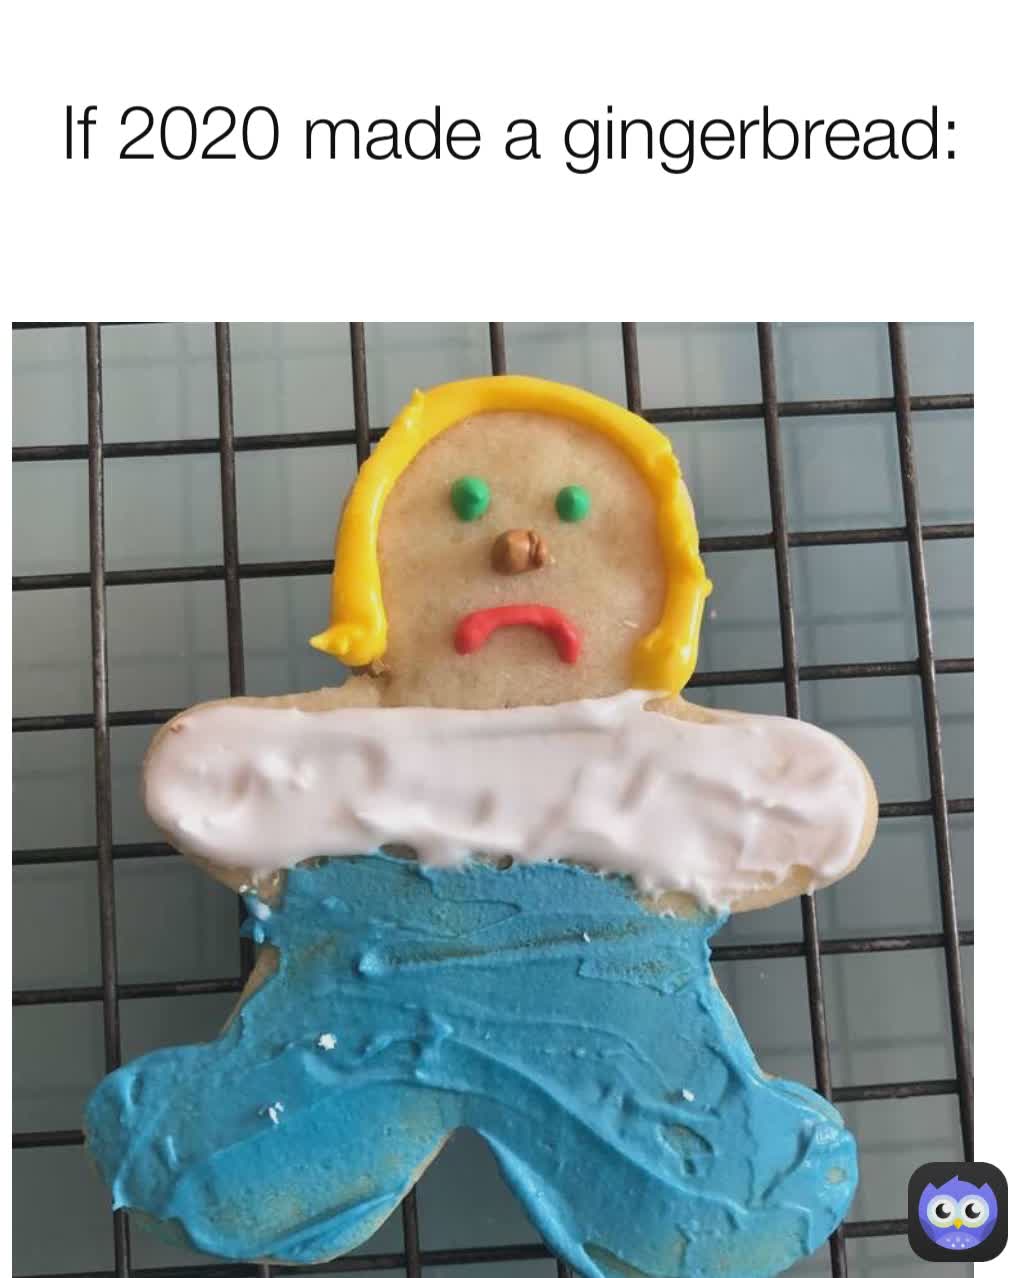 If 2020 made a gingerbread: